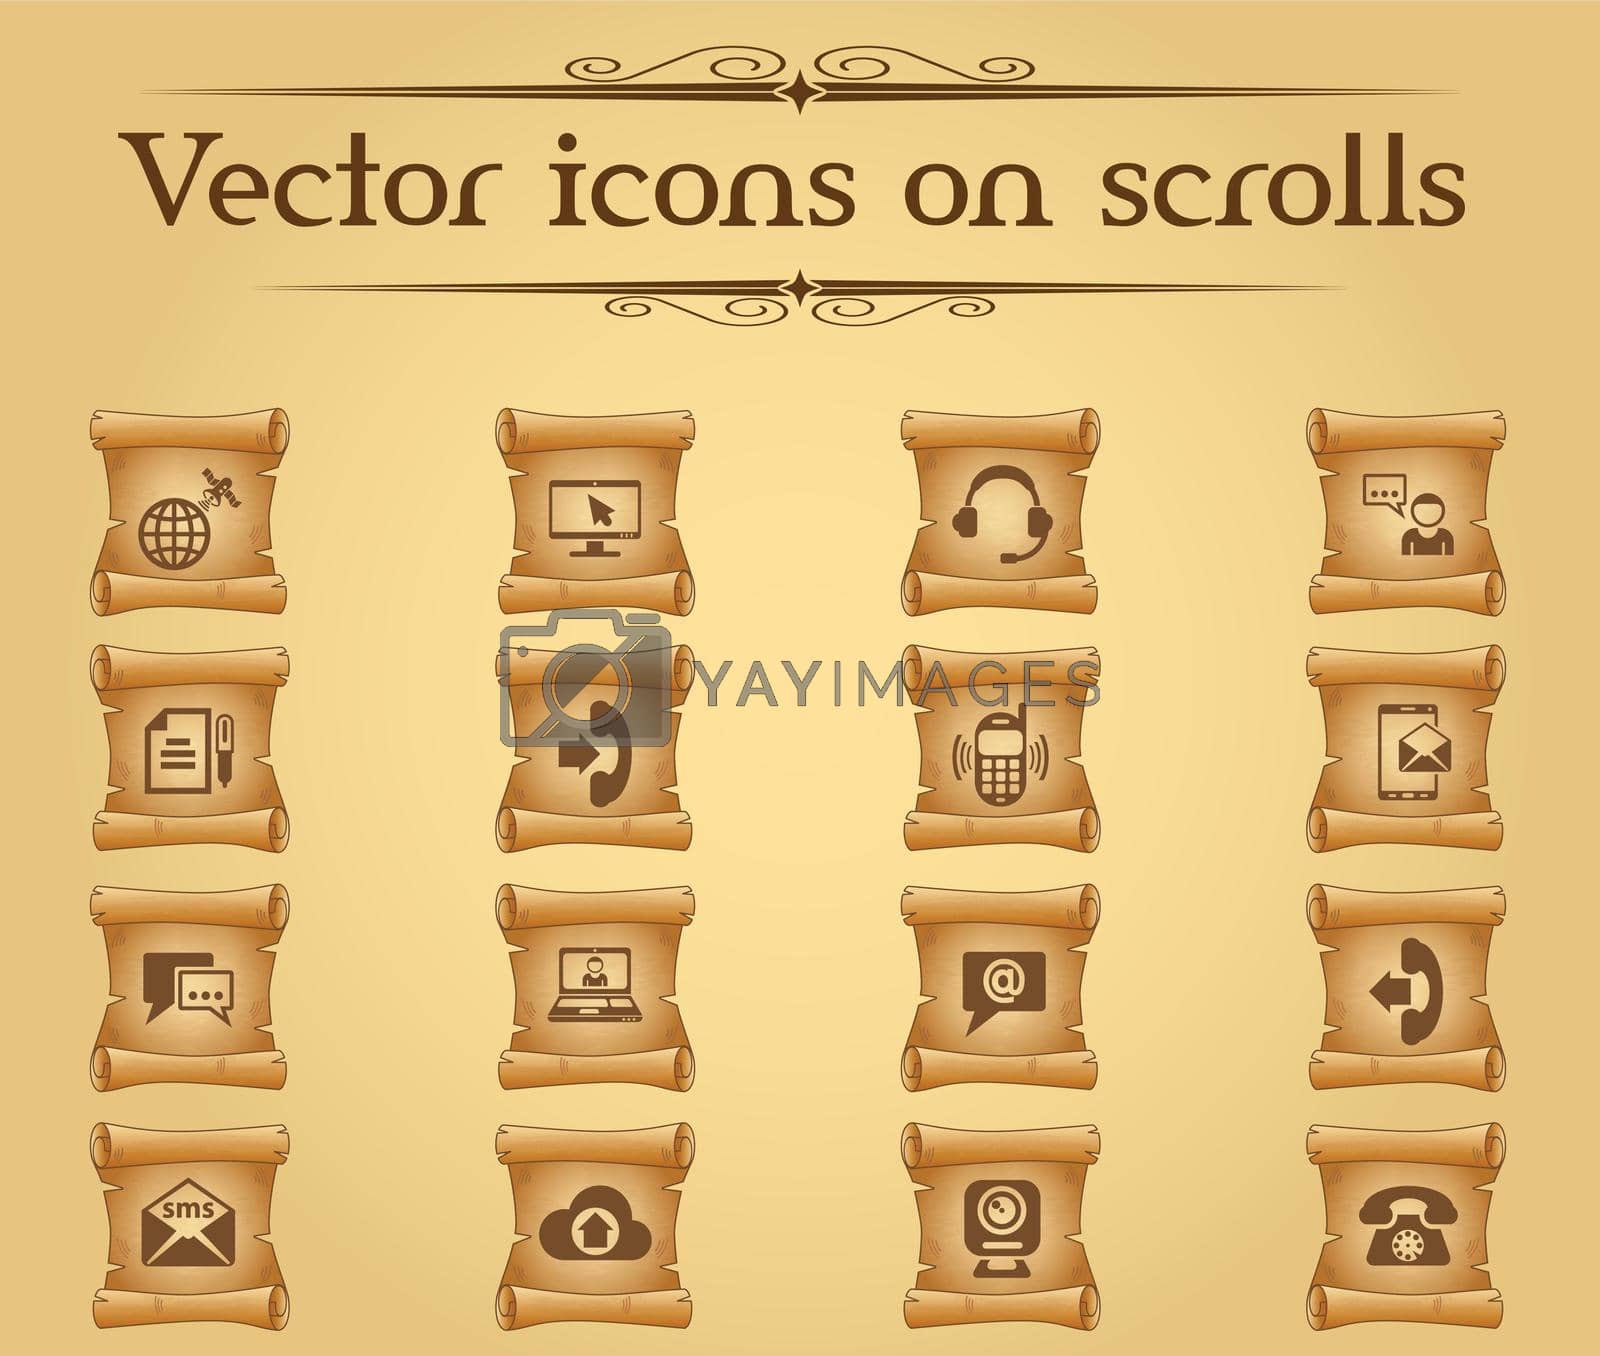 communication vector icons on scrolls for your creative ideas